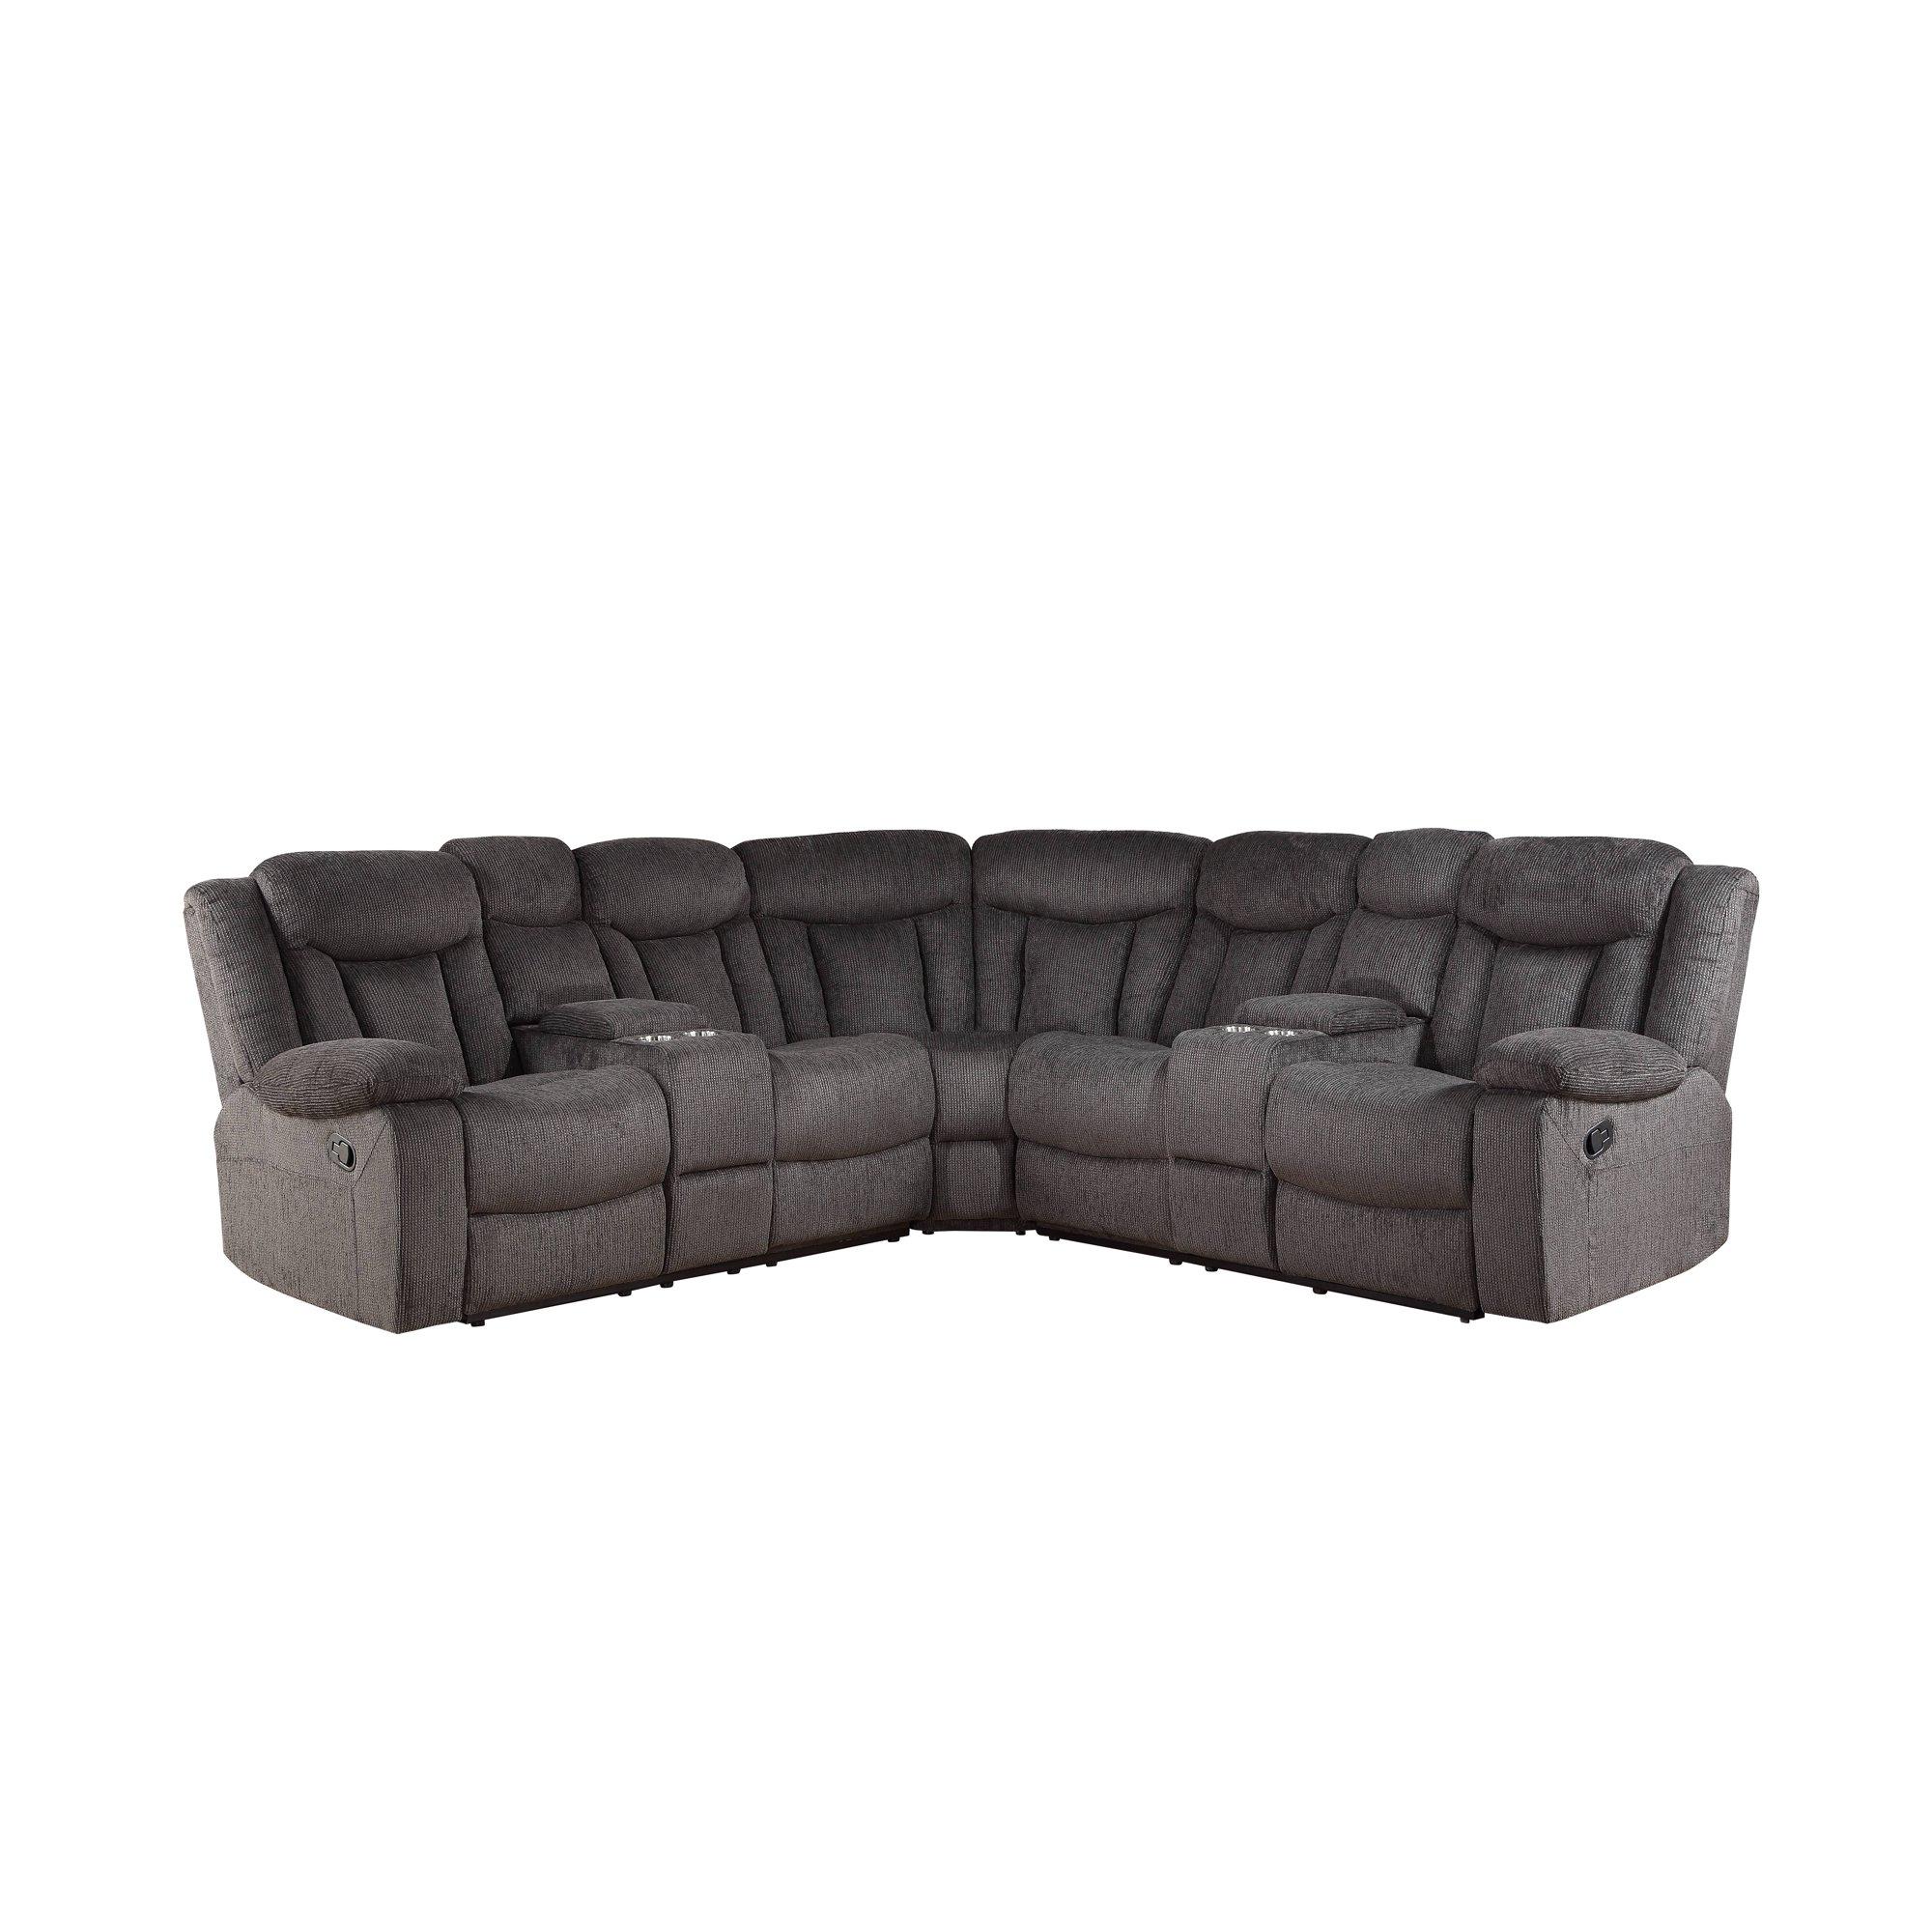 Contemporary Motion Sectional Rylan 54965-3pcs in Dark Brown Fabric